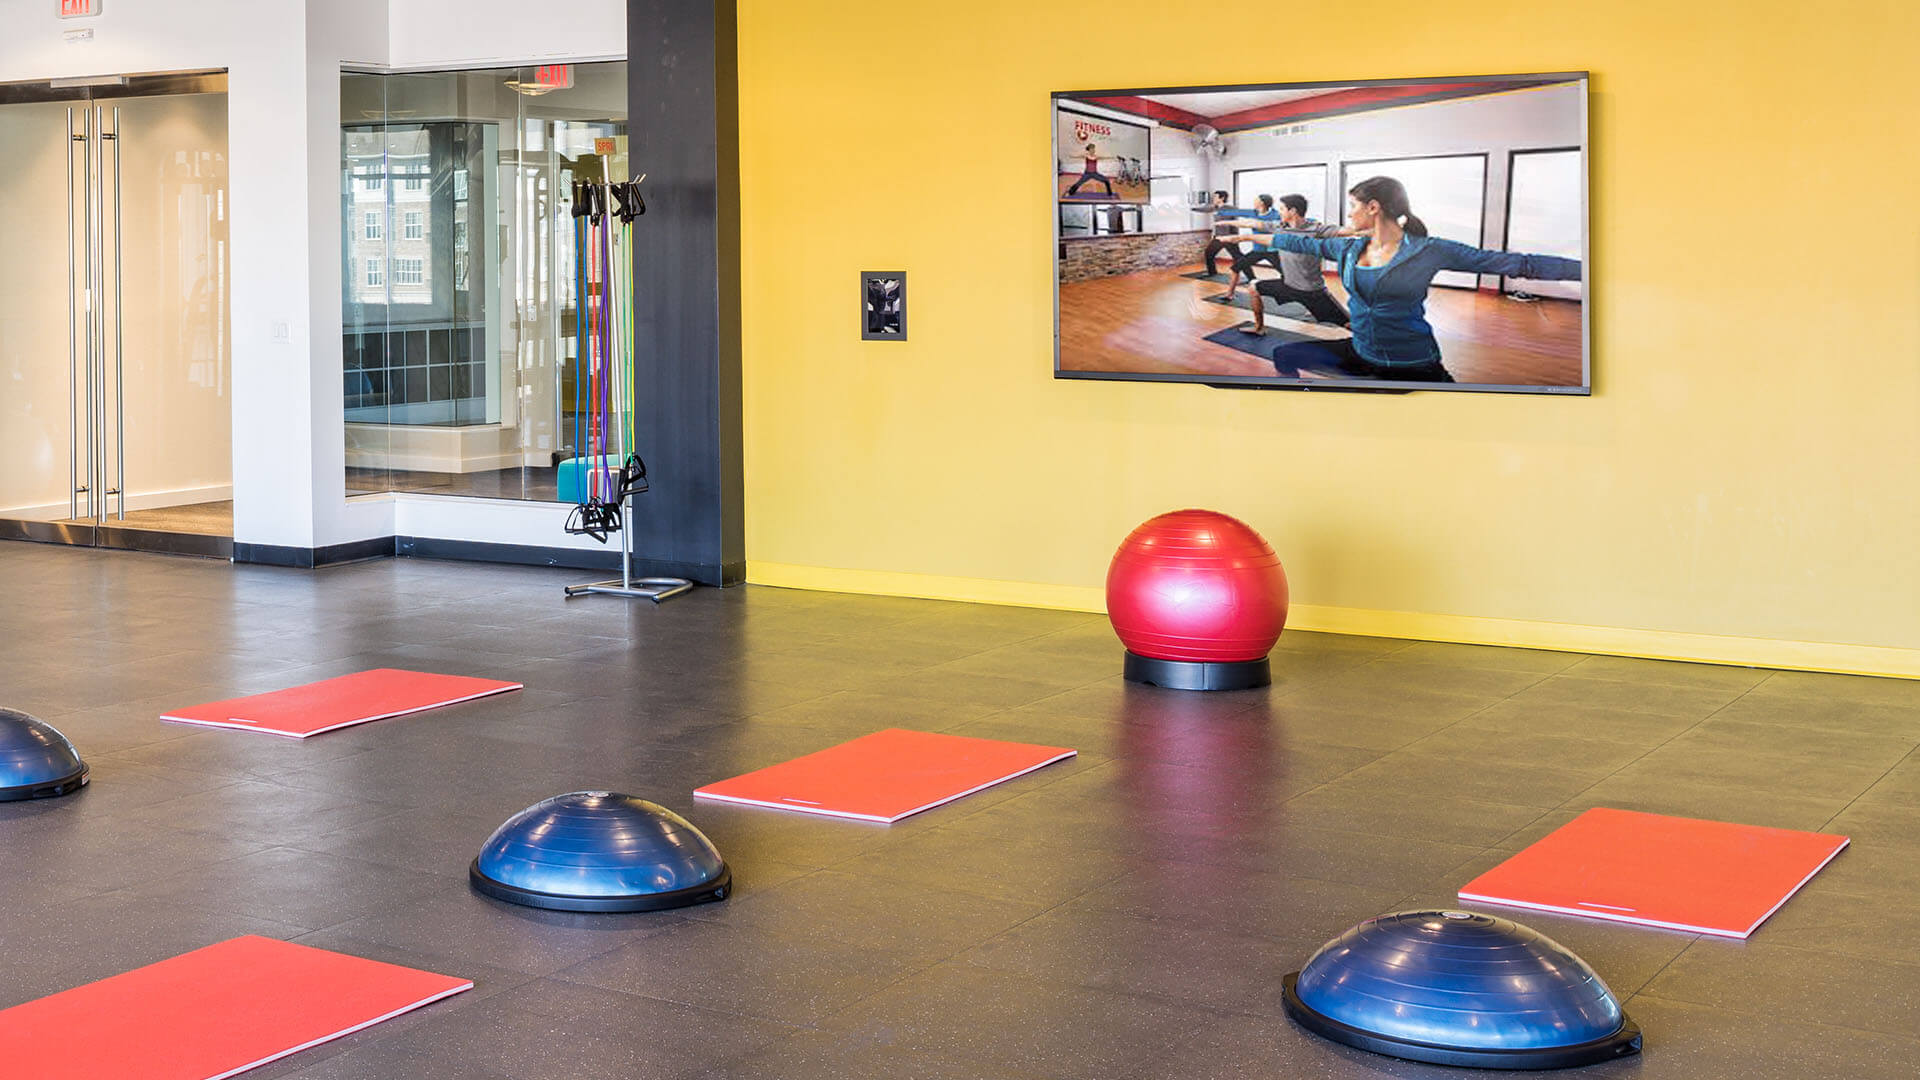 Fitness-on-demand studio with a kiosk pre-programmed with popular virtual classes